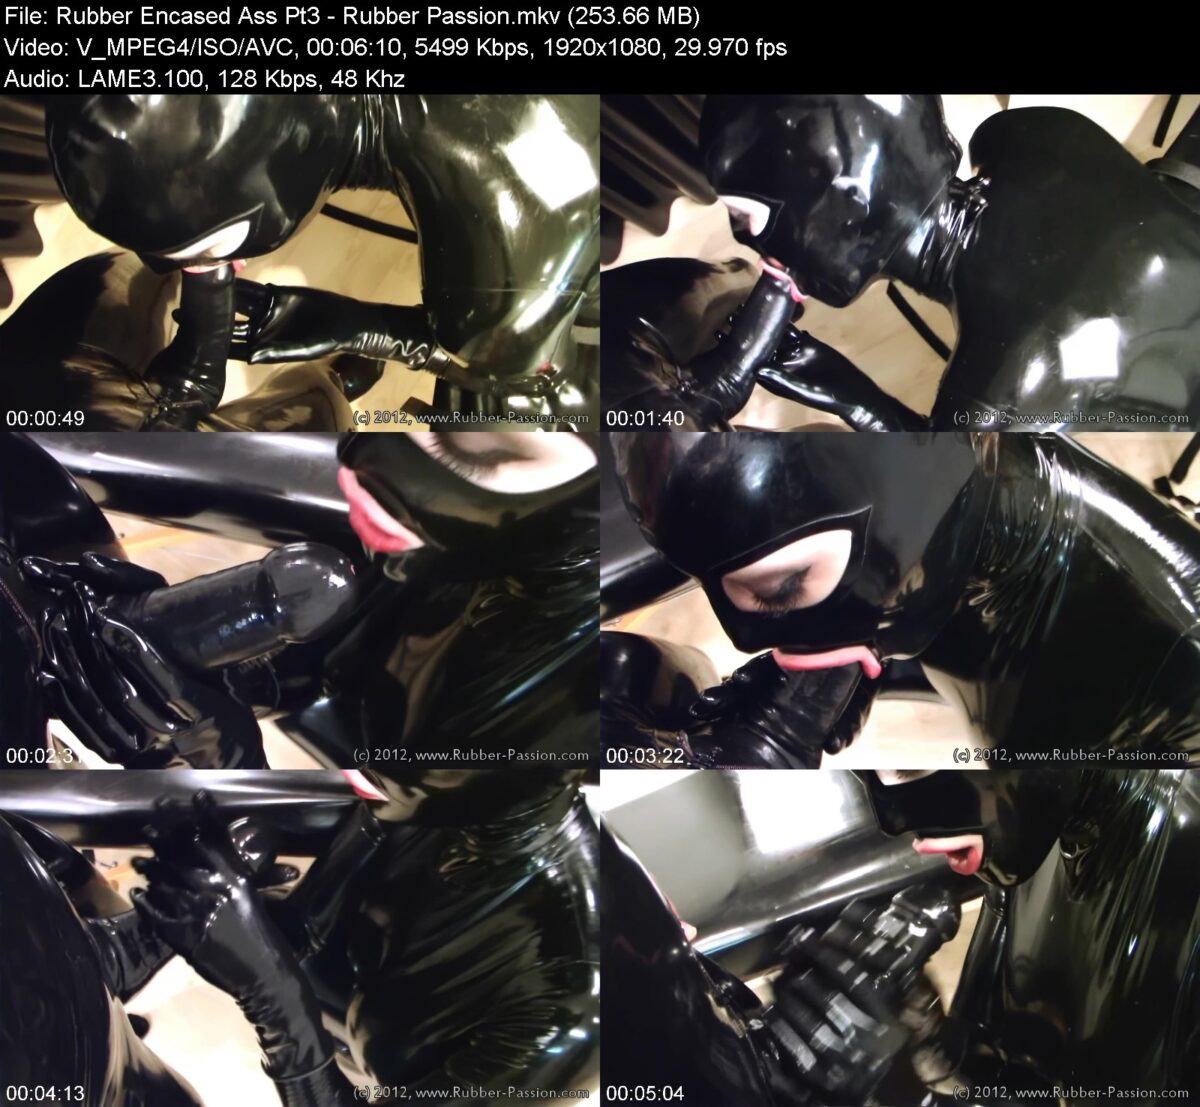 Rubber Encased Ass Pt3 in Rubber Passion